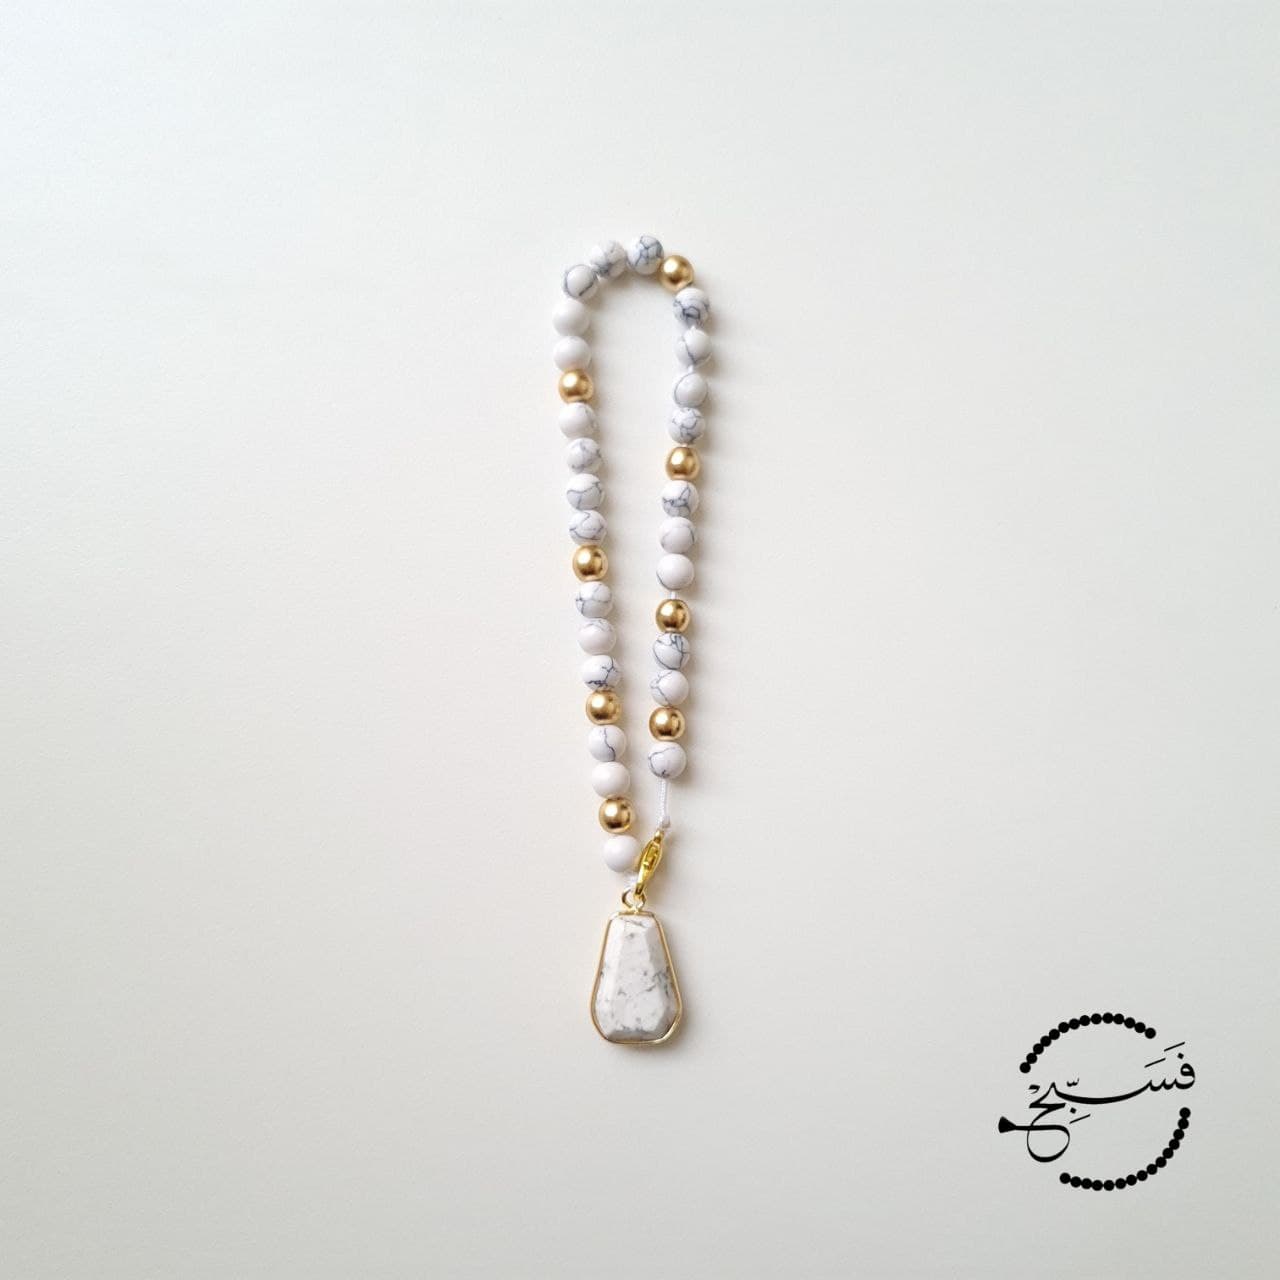 Stunning white howlite & matte gold beads paired with a white howlite pendant.   33 bead tasbih that can be clipped onto your bag.   Packaged in a luxurious pouch and a gift box.